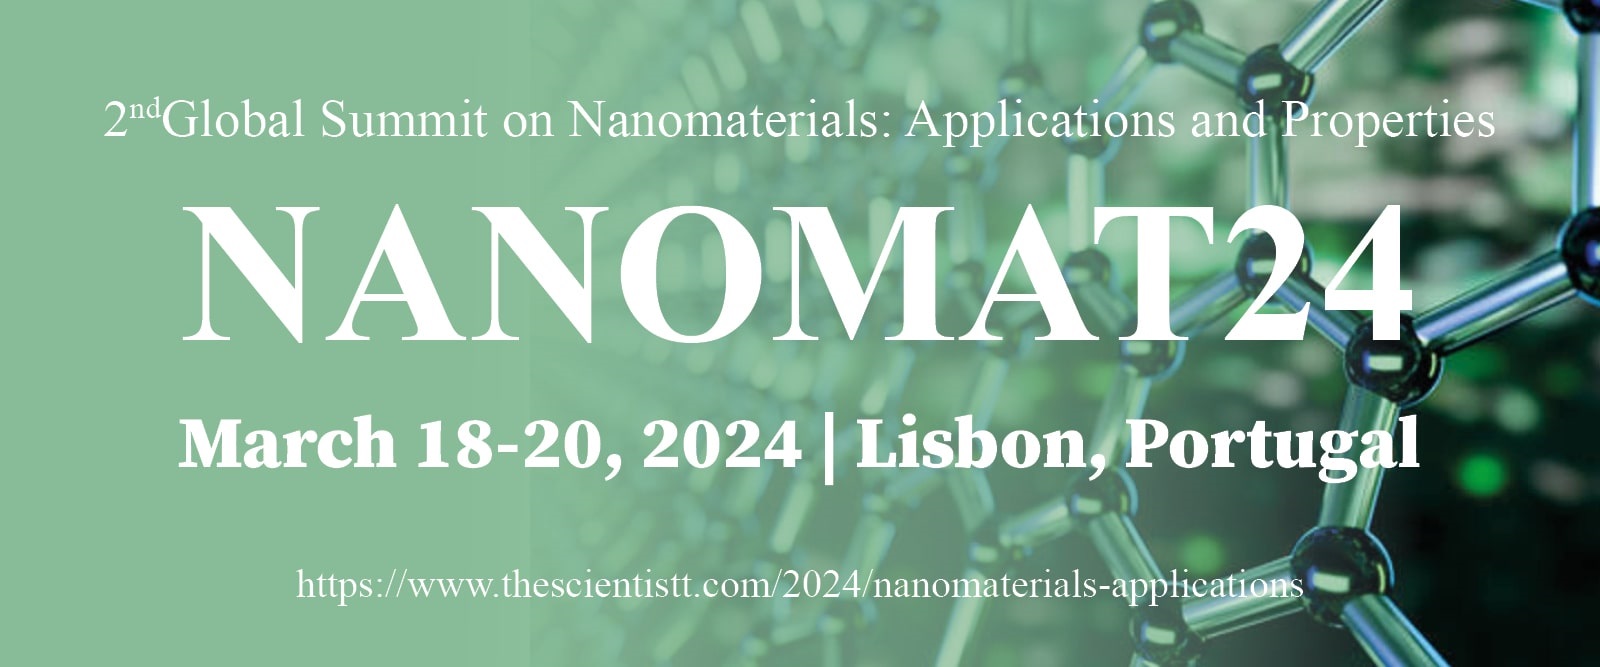  2nd Global Summit on Nanomaterials: Applications and Properties